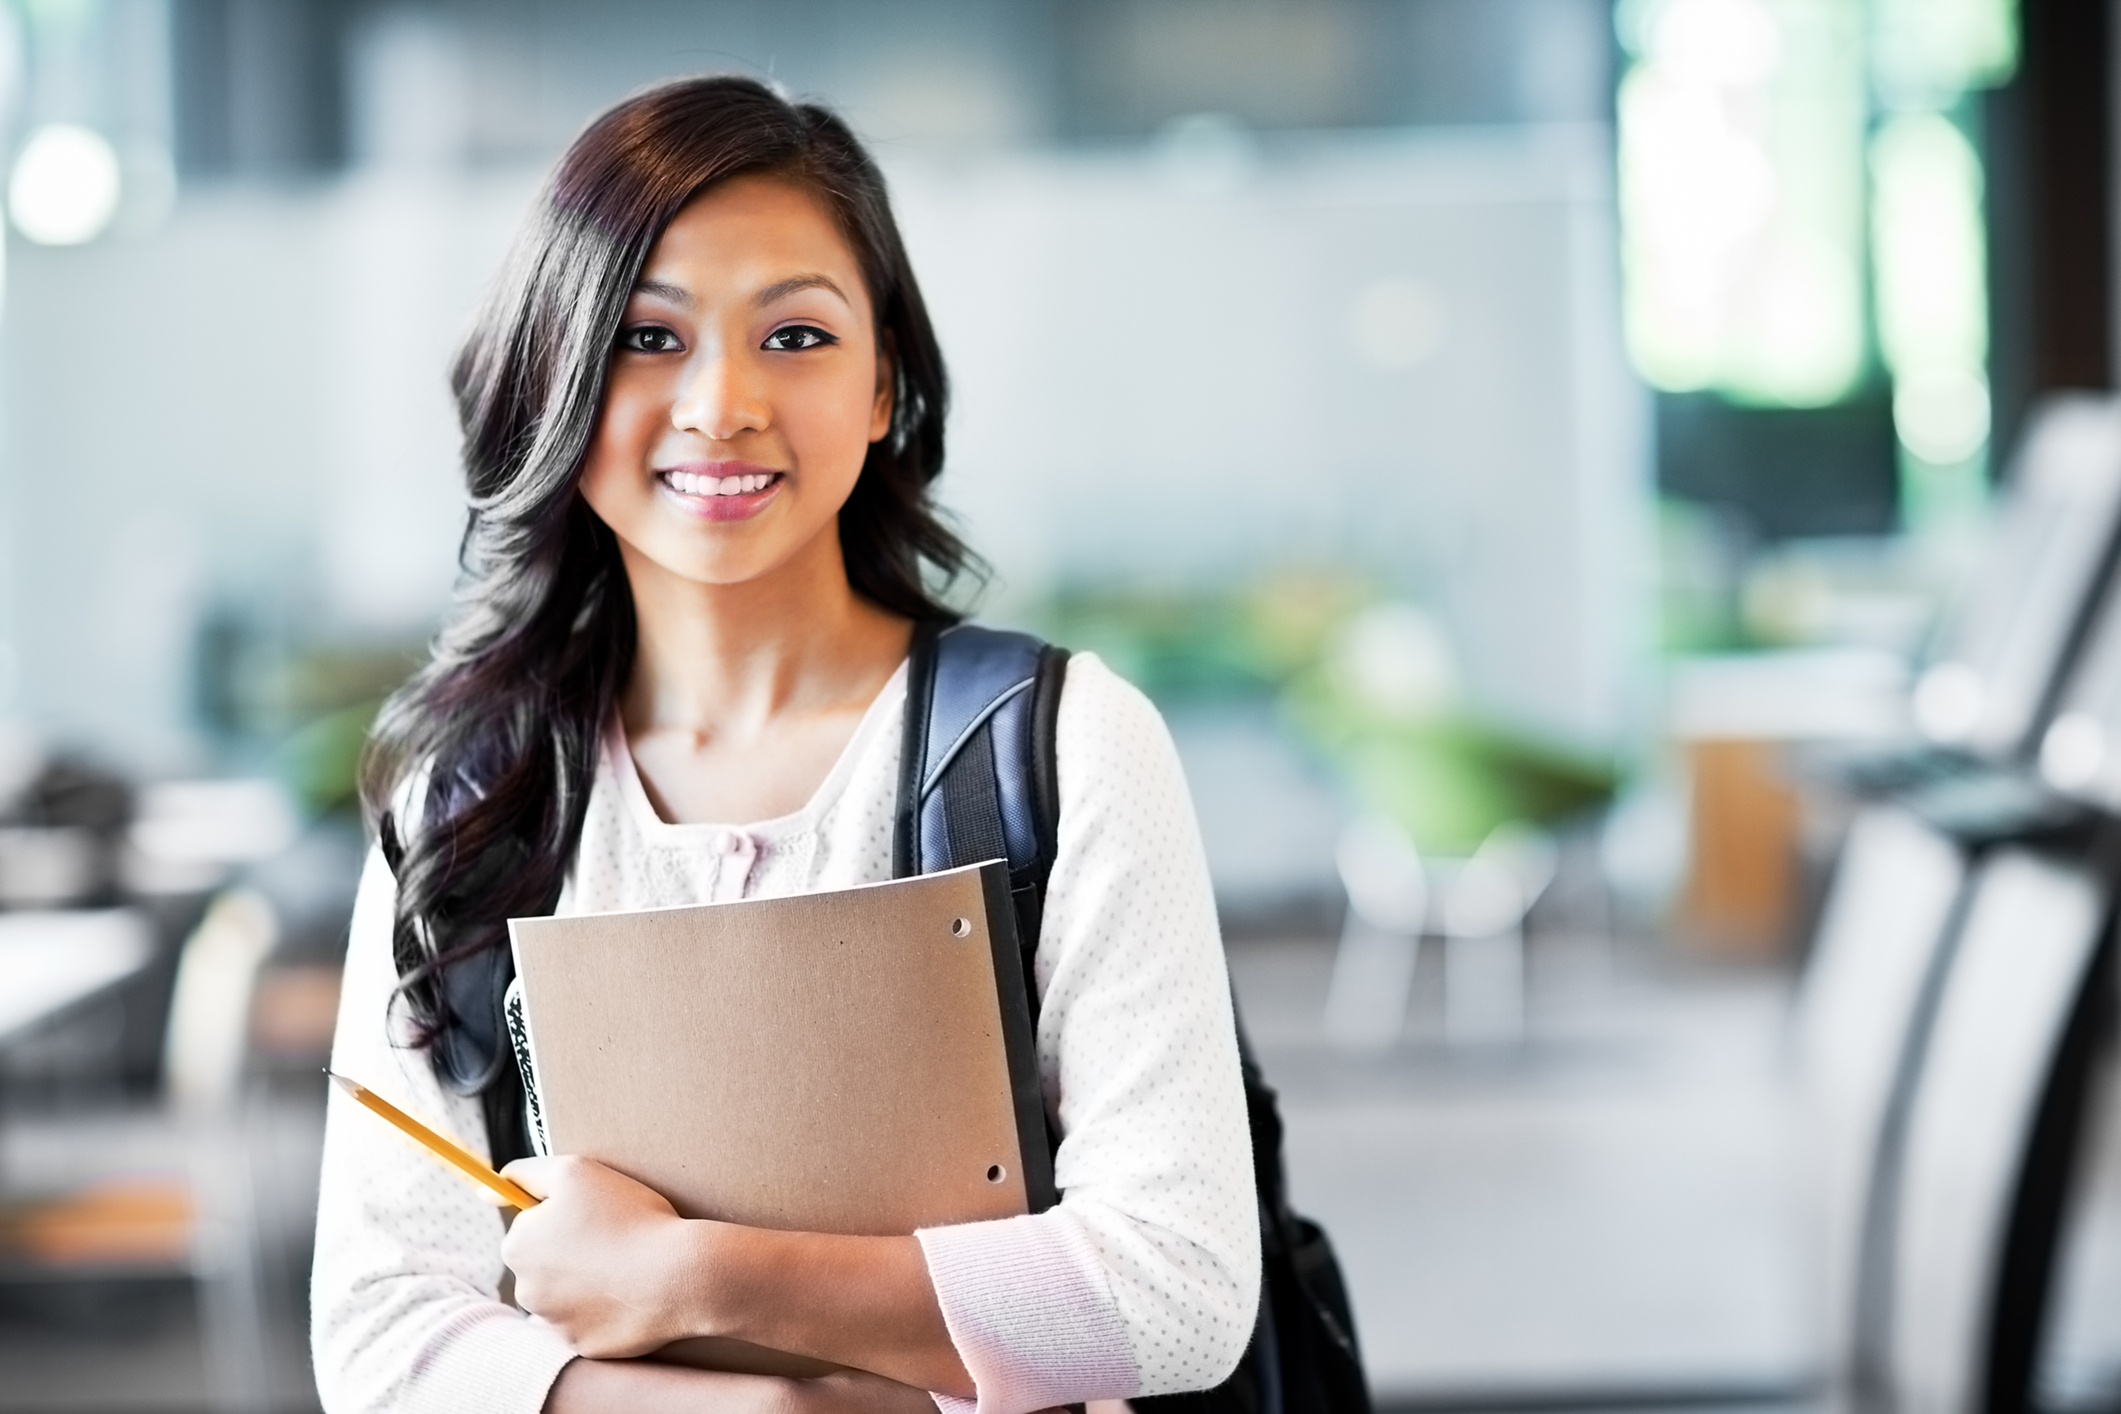 smiling woman with backpack and notebook standing in an college